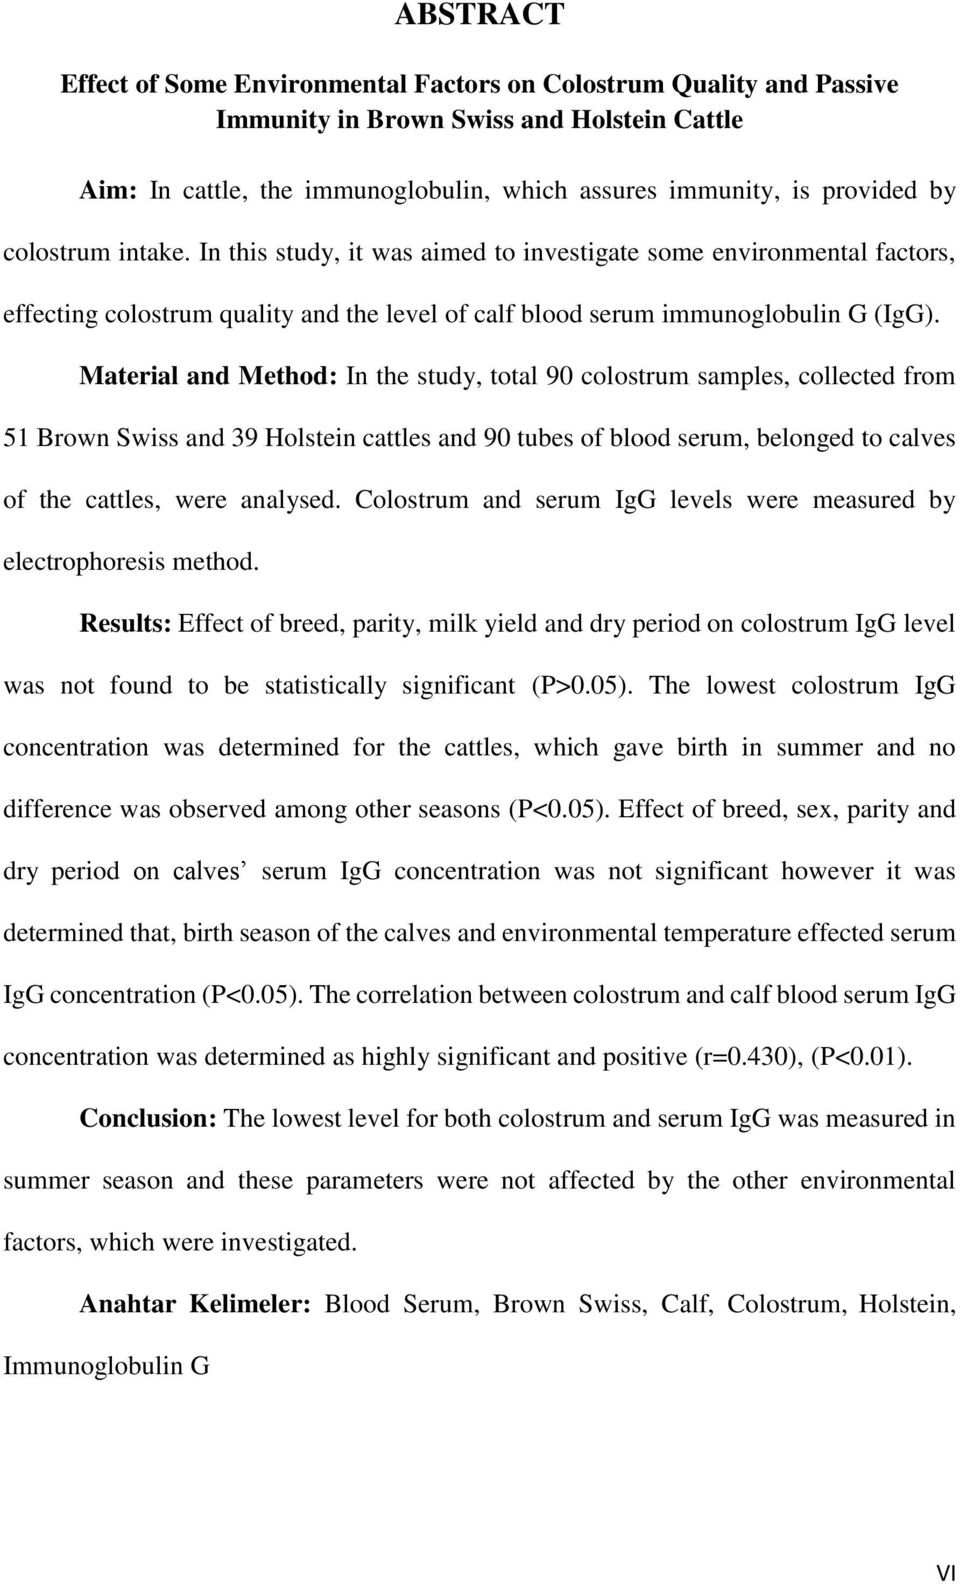 Material and Method: In the study, total 90 colostrum samples, collected from 51 Brown Swiss and 39 Holstein cattles and 90 tubes of blood serum, belonged to calves of the cattles, were analysed.